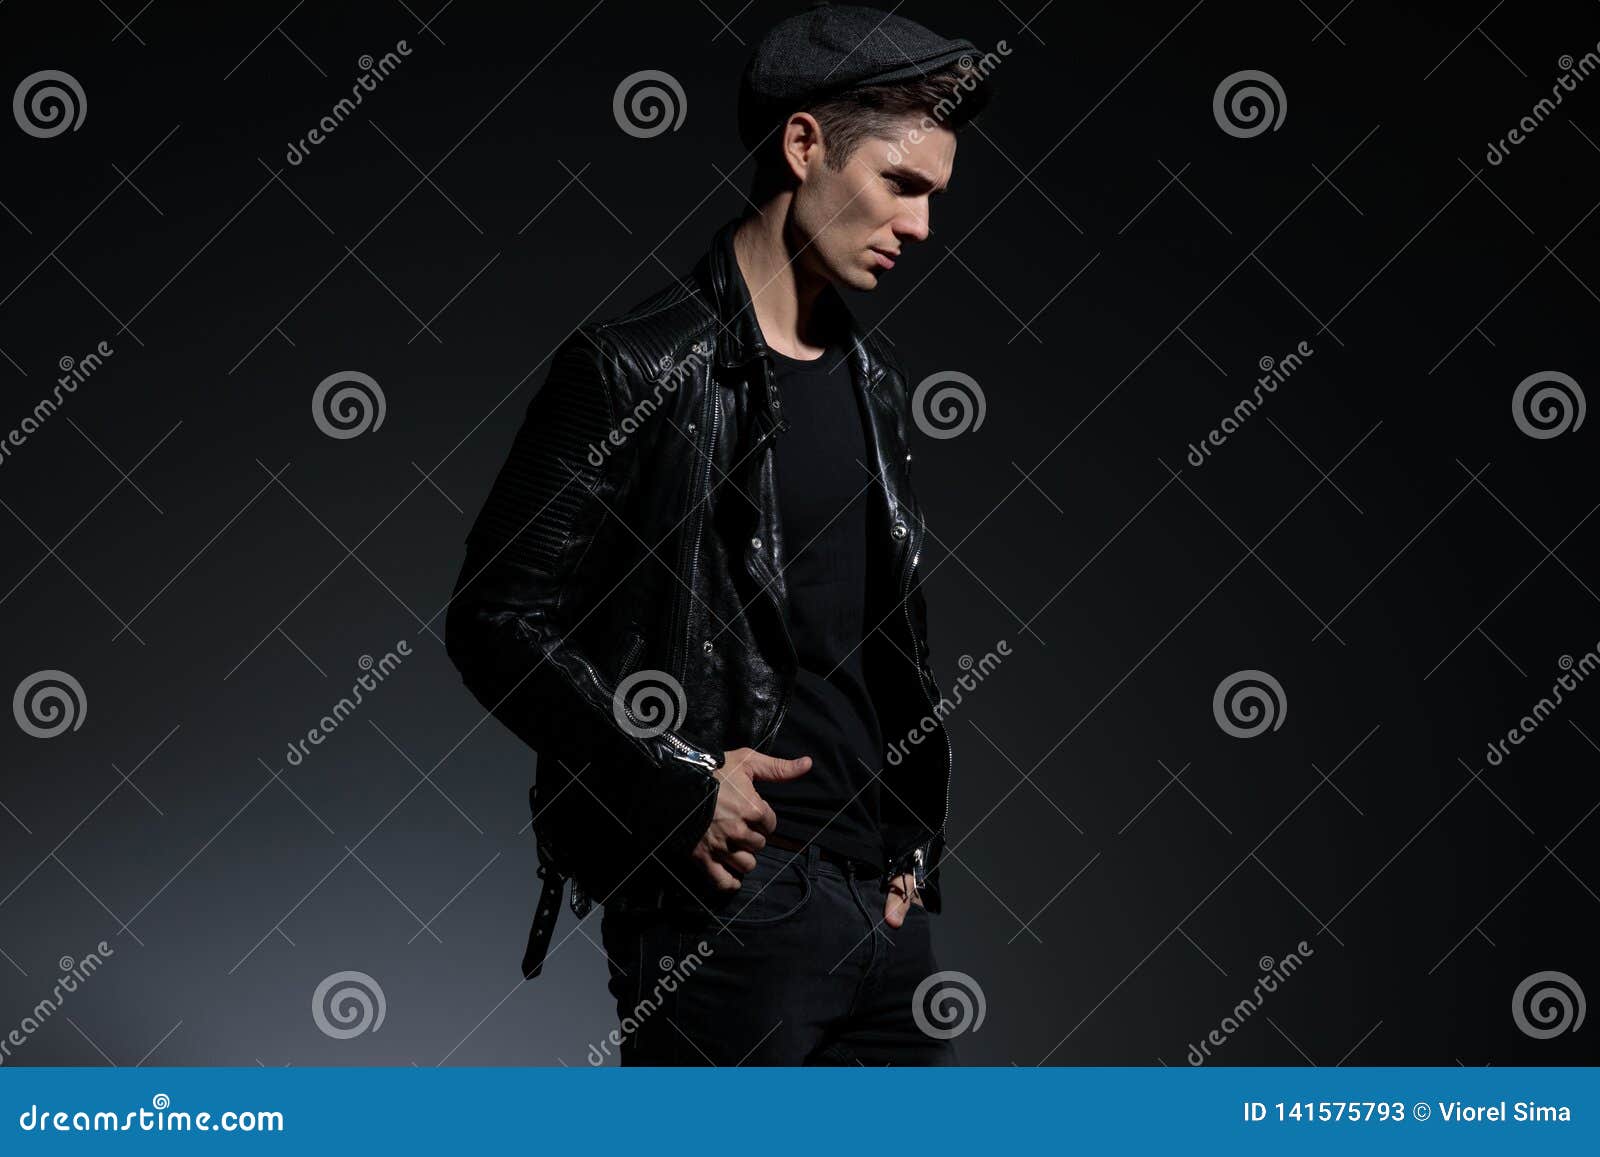 Side View of a Dramatic Young Man in Leather Jacket Stock Image - Image ...